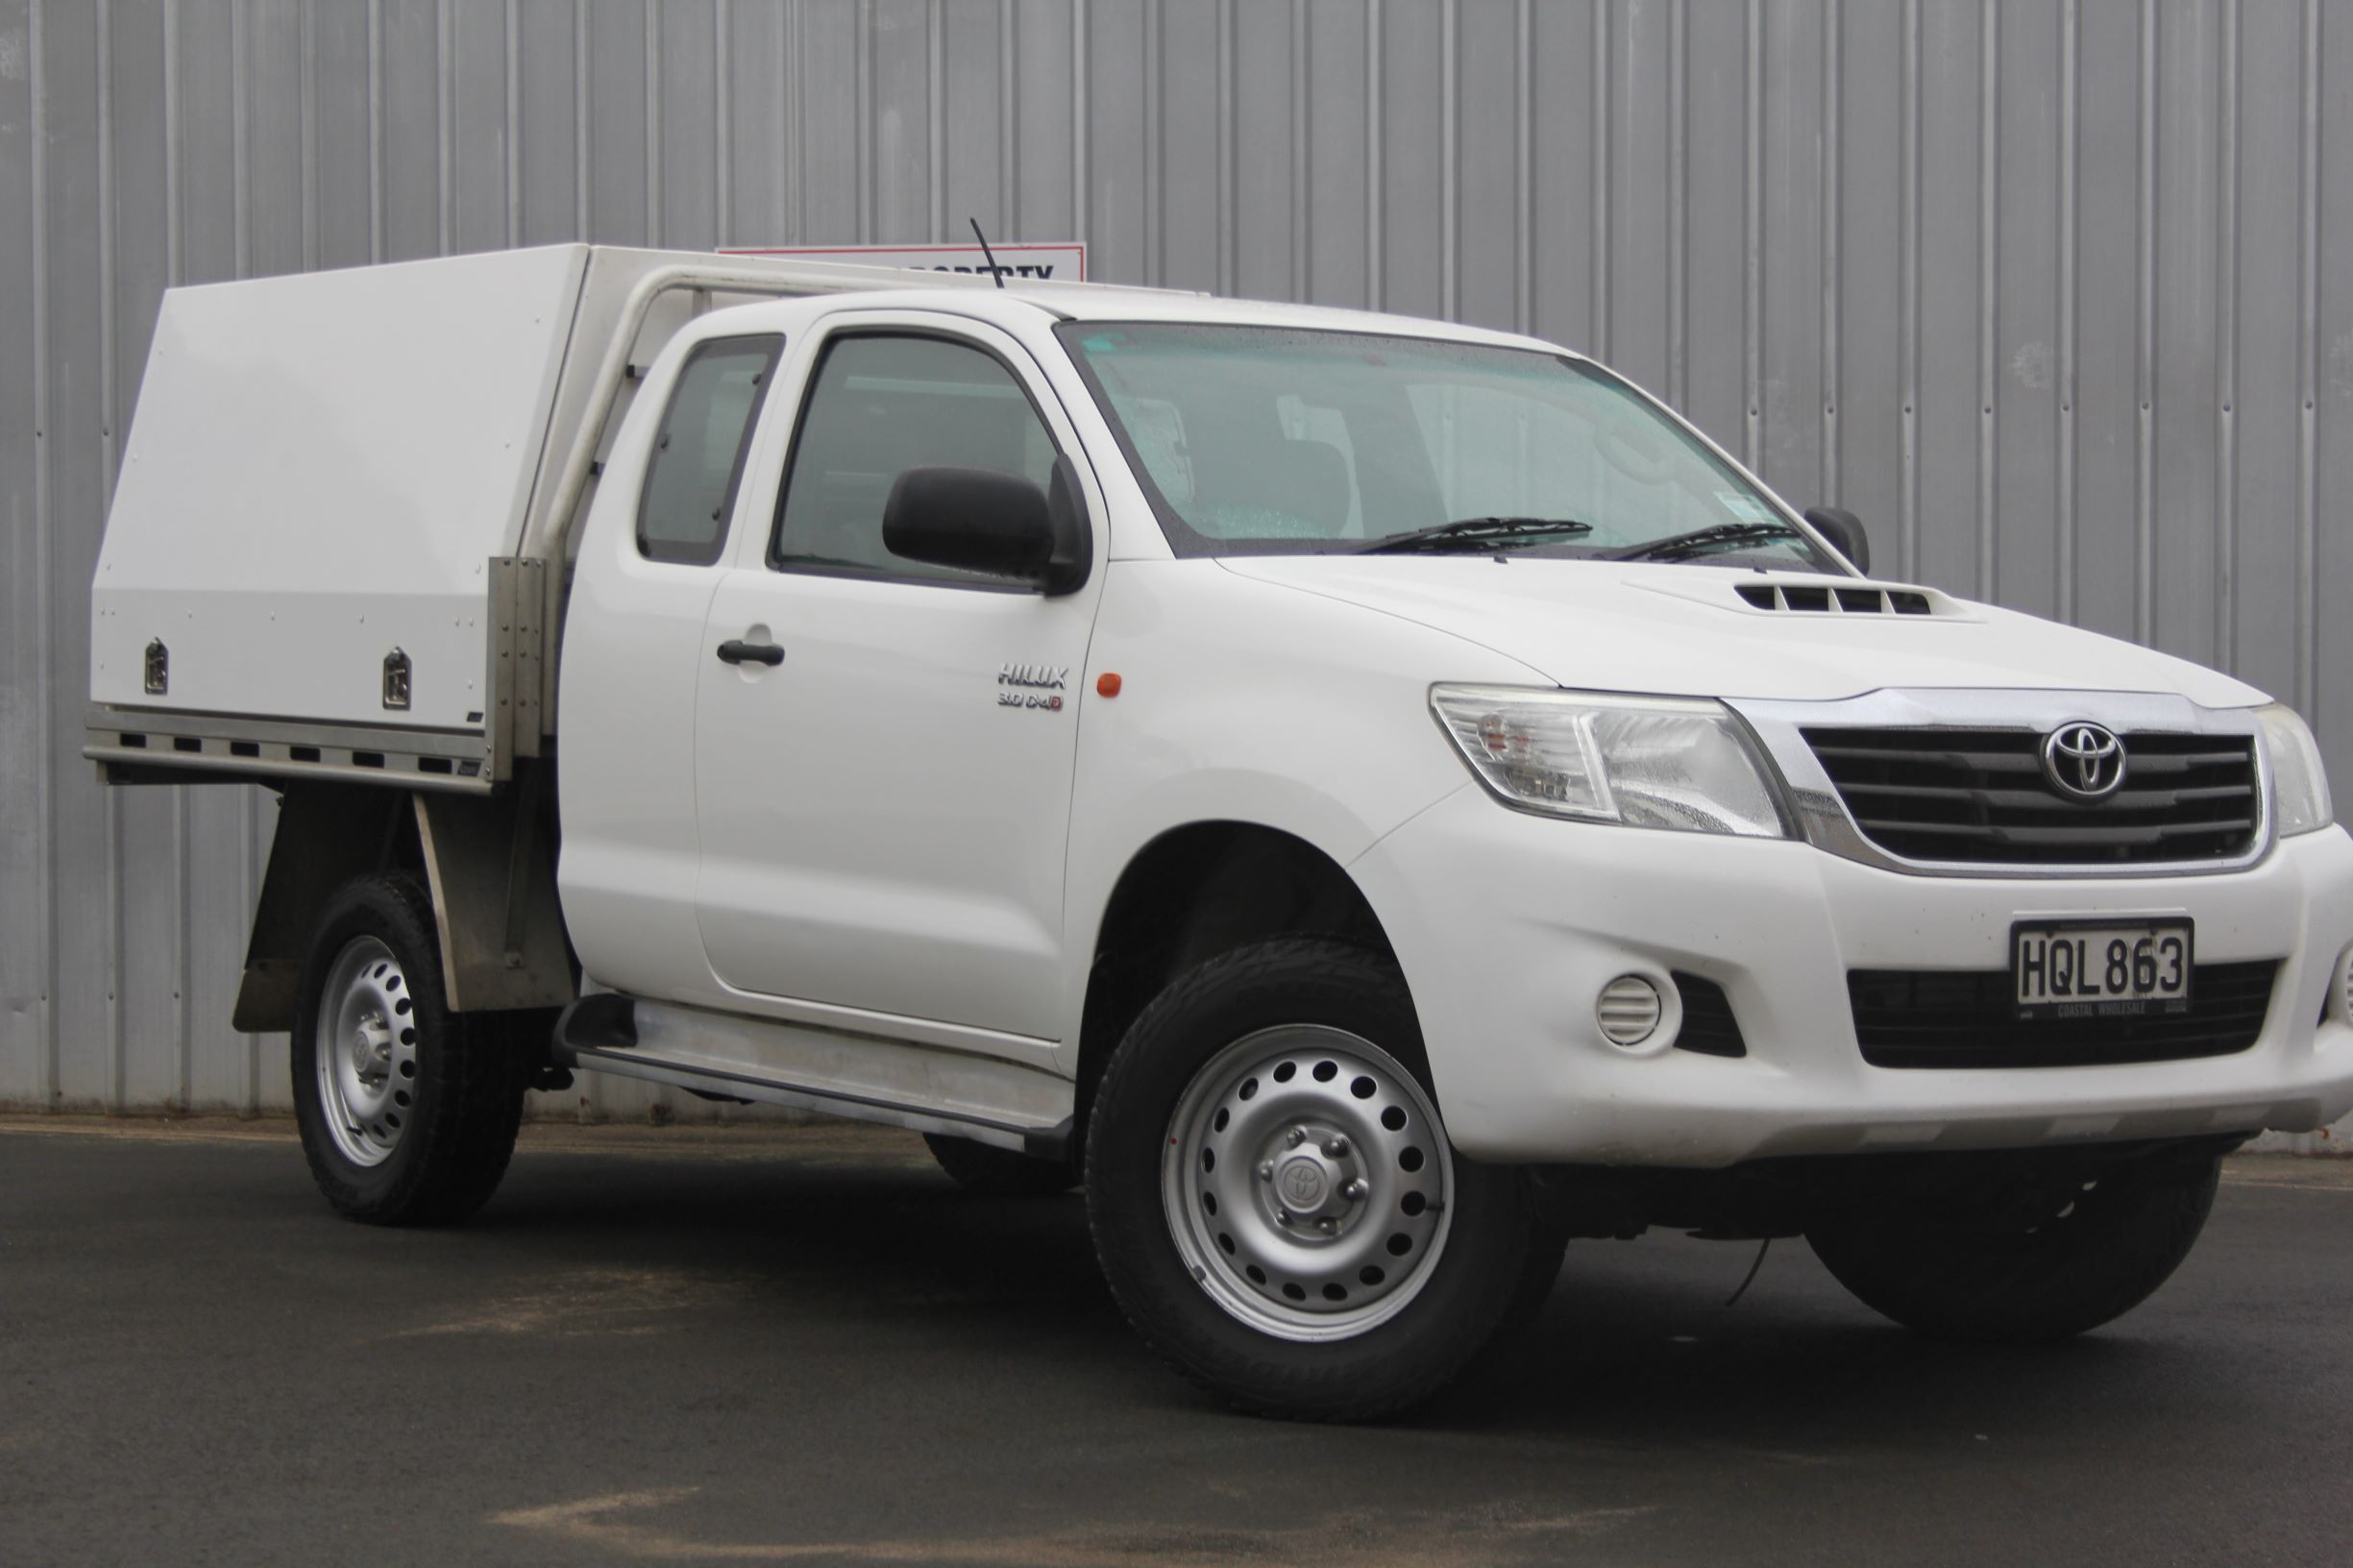 Toyota Hilux 4WD manual toolbox 2014 for sale in Auckland